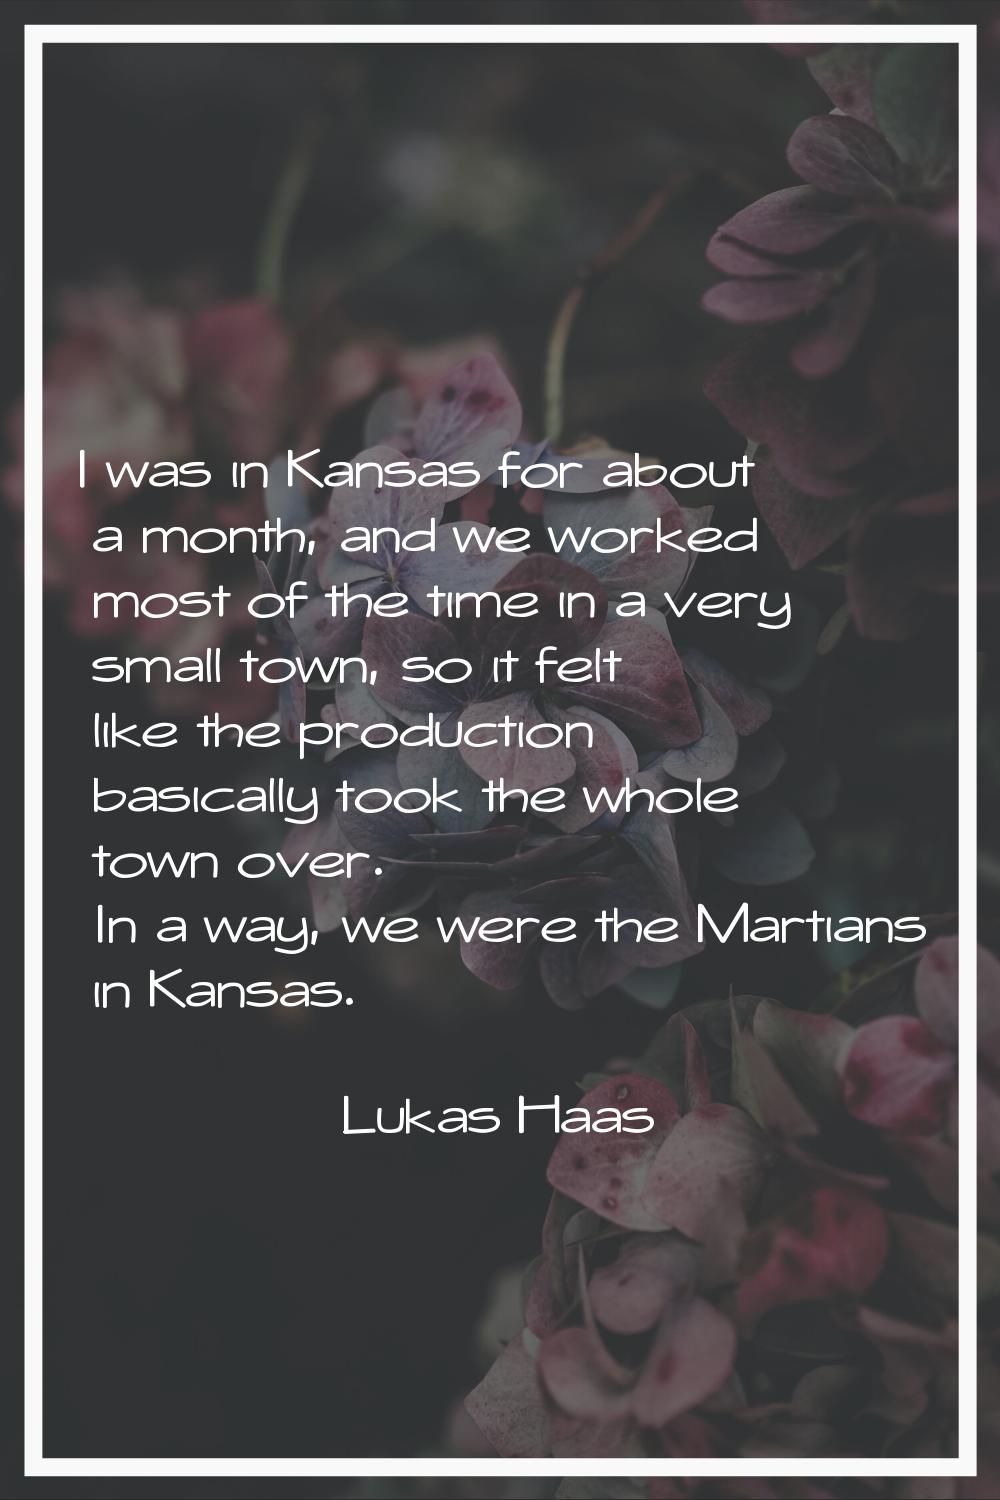 I was in Kansas for about a month, and we worked most of the time in a very small town, so it felt 